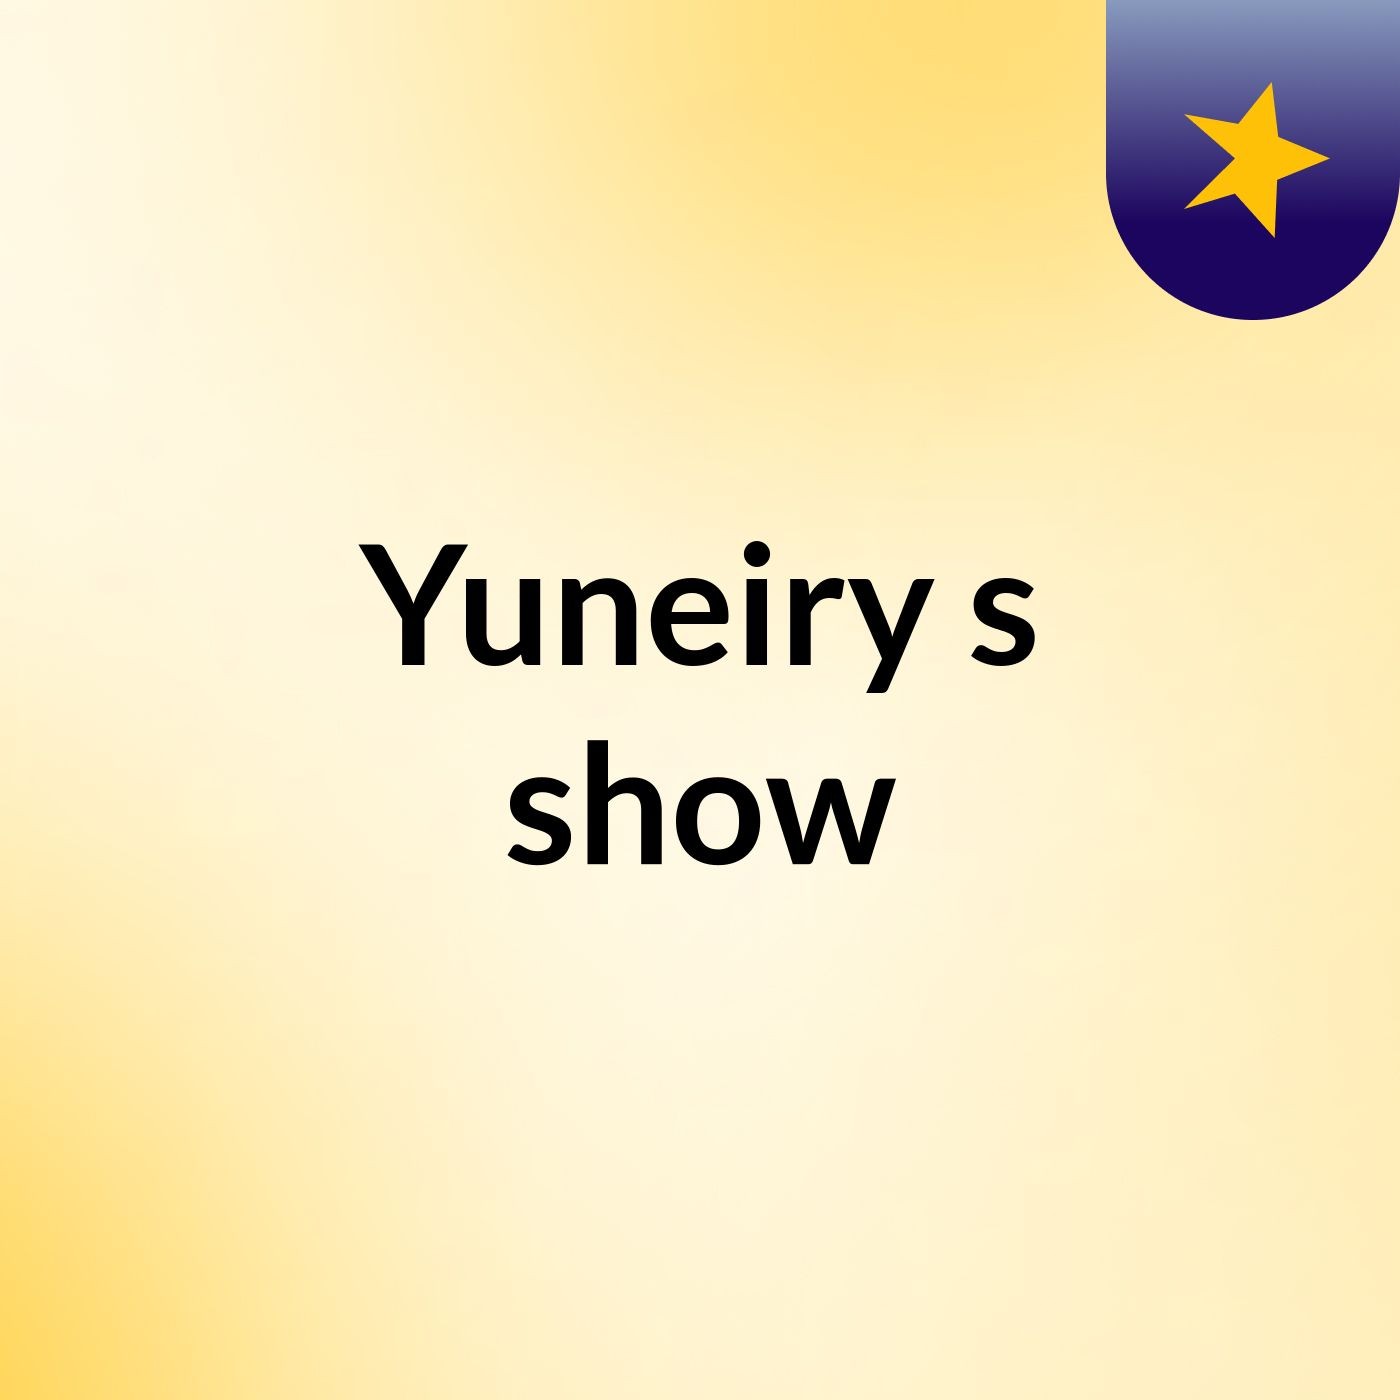 Yuneiry's show